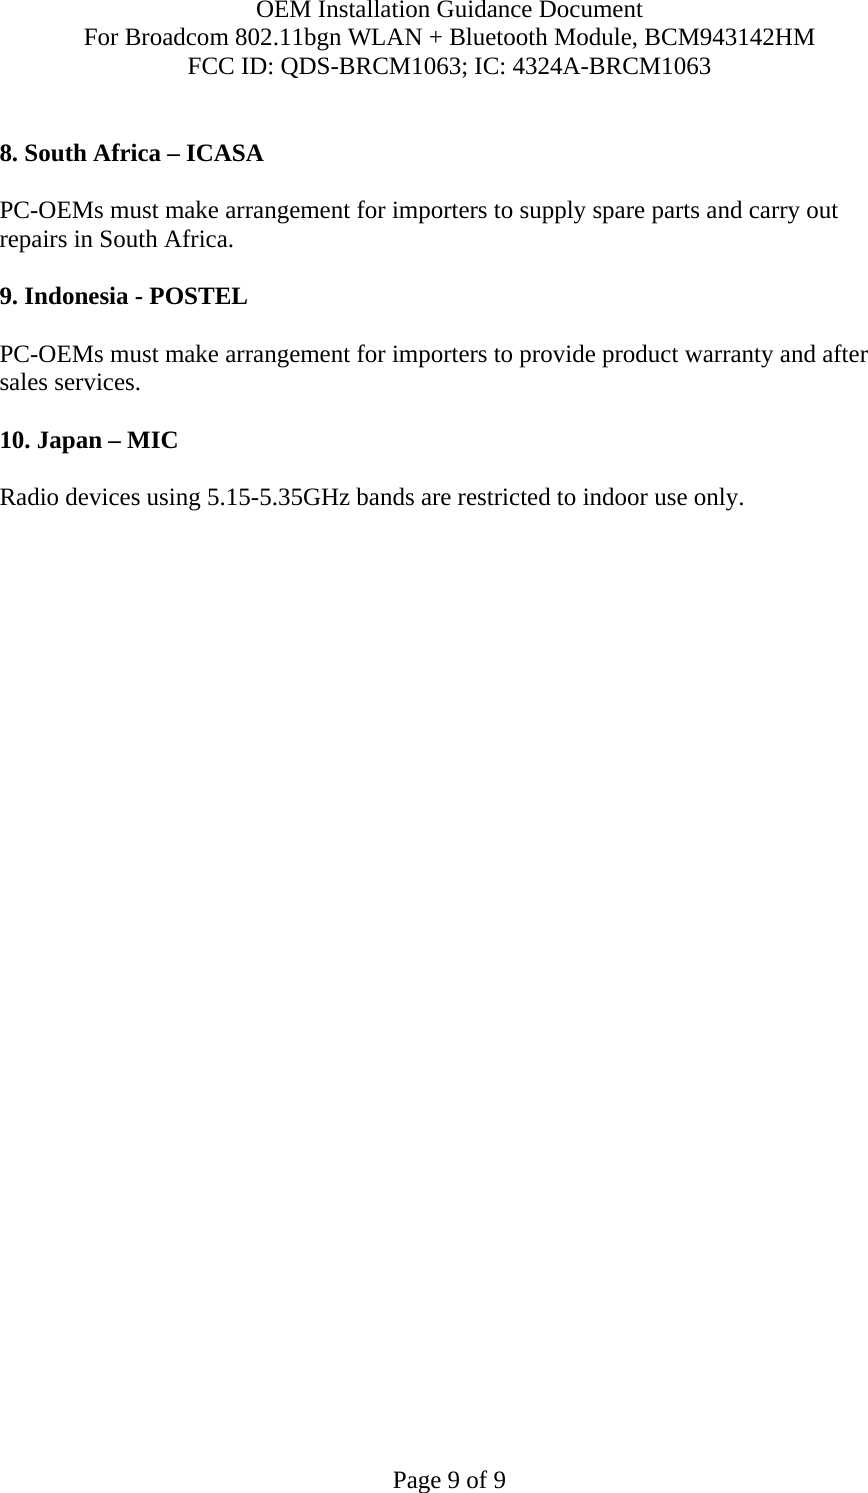 OEM Installation Guidance Document For Broadcom 802.11bgn WLAN + Bluetooth Module, BCM943142HM FCC ID: QDS-BRCM1063; IC: 4324A-BRCM1063  Page 9 of 9  8. South Africa – ICASA  PC-OEMs must make arrangement for importers to supply spare parts and carry out repairs in South Africa.  9. Indonesia - POSTEL  PC-OEMs must make arrangement for importers to provide product warranty and after sales services.   10. Japan – MIC  Radio devices using 5.15-5.35GHz bands are restricted to indoor use only.  